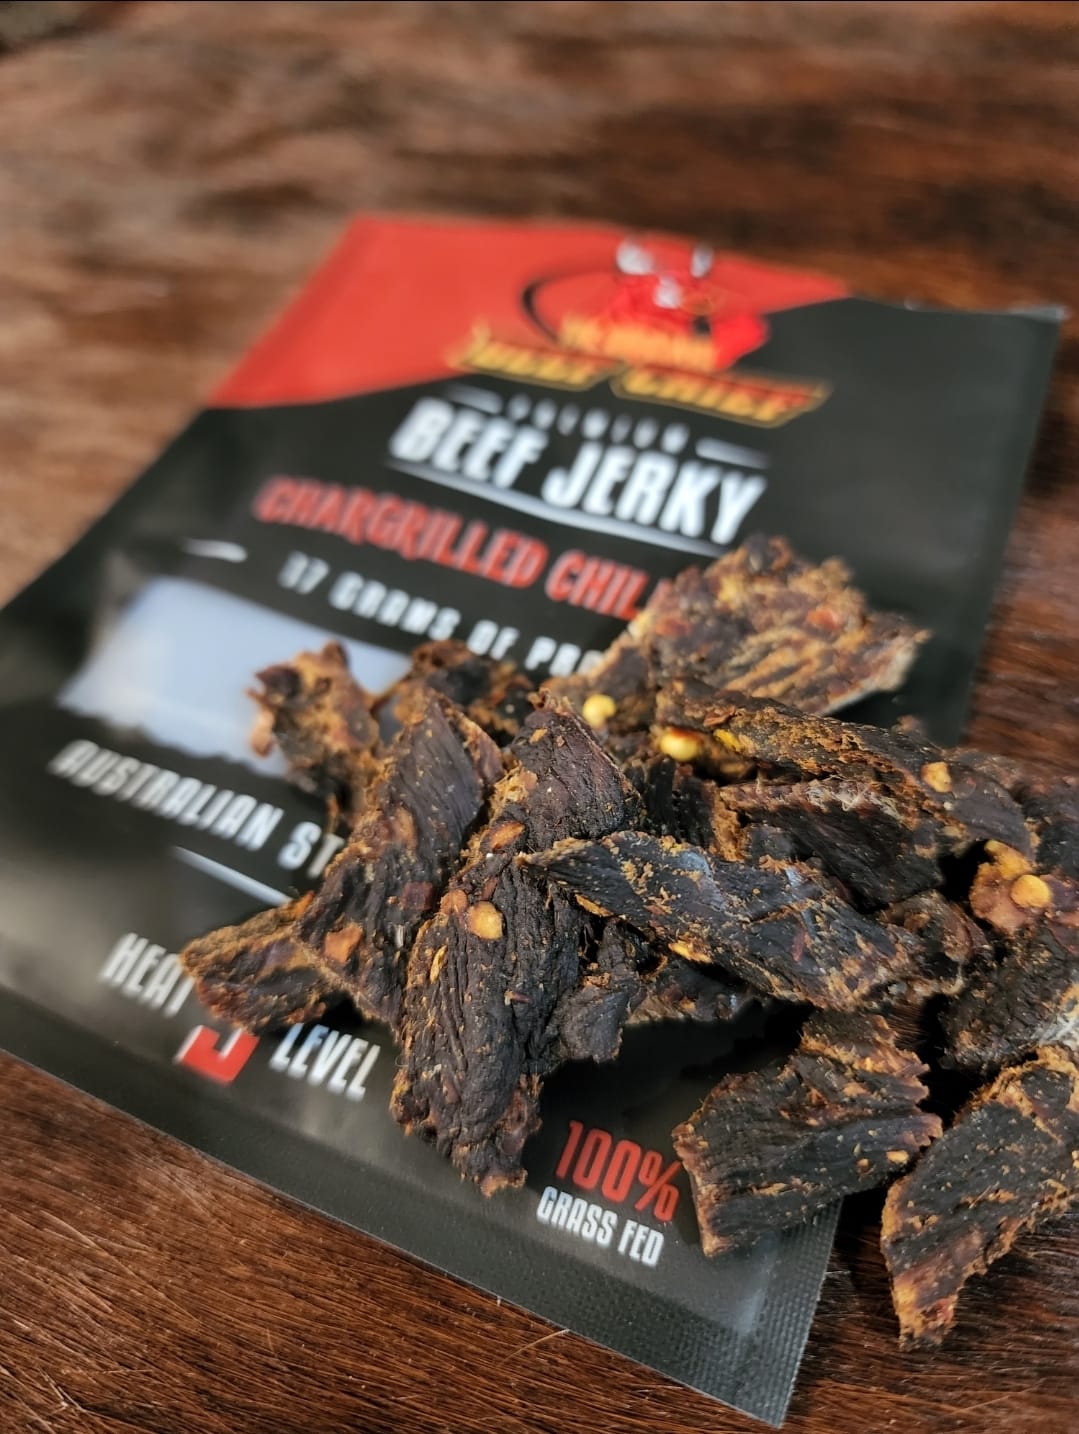 30g Chargrilled Chilli BBQ Beef Jerky - Original Beef Chief